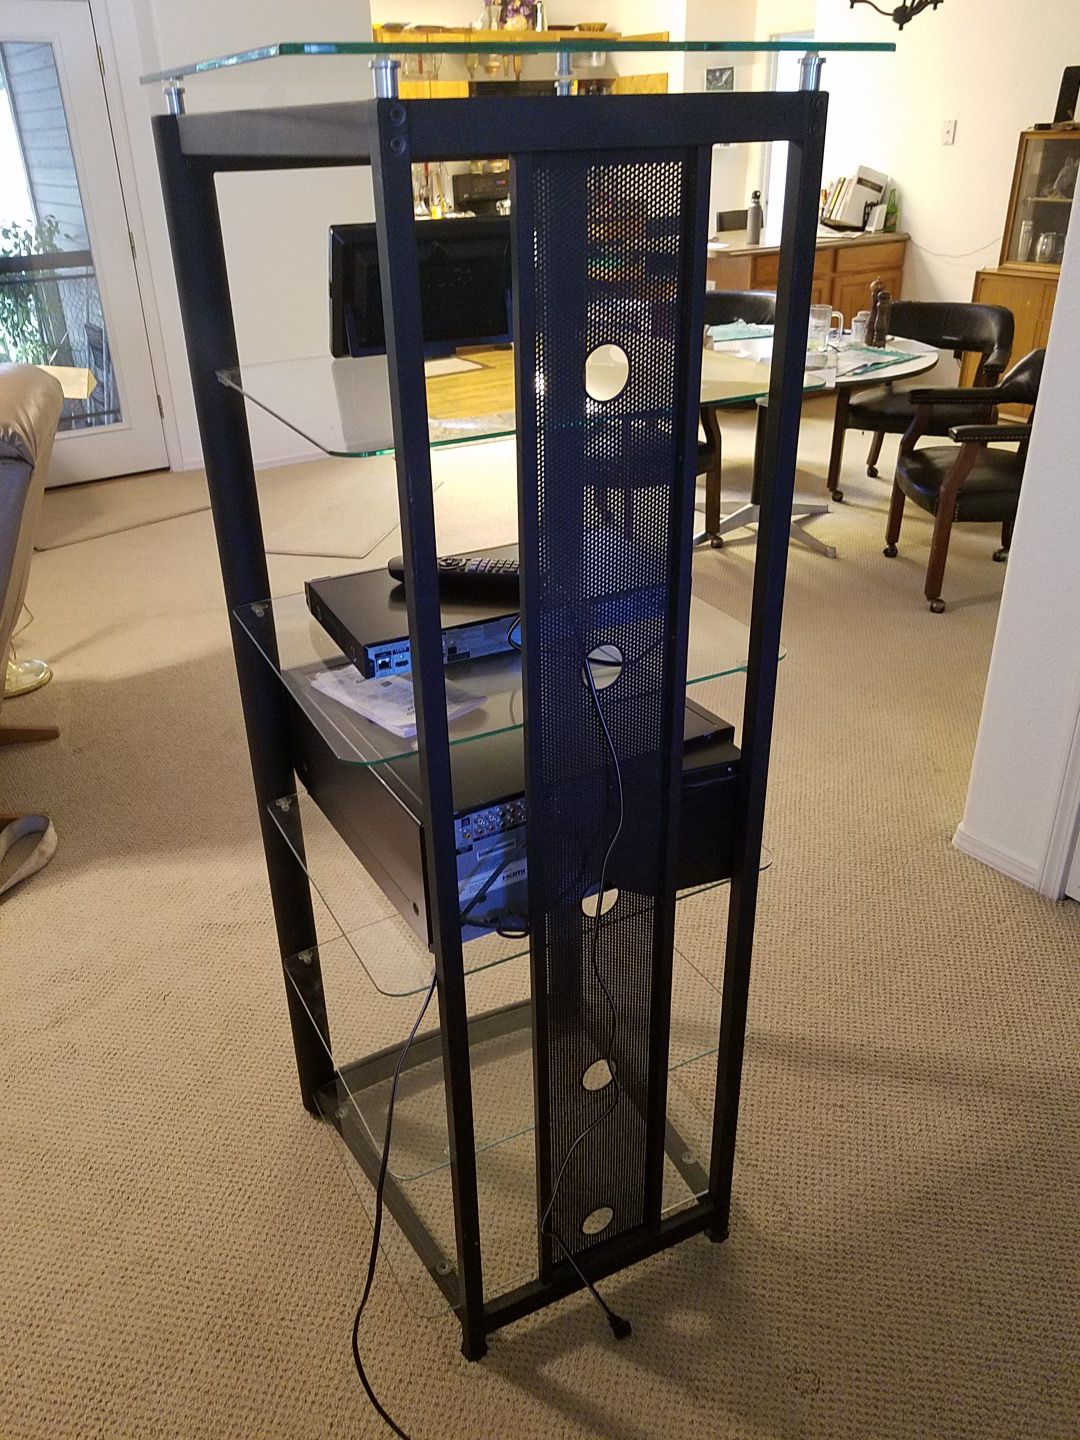 Video equipment stand, black steel and glass!